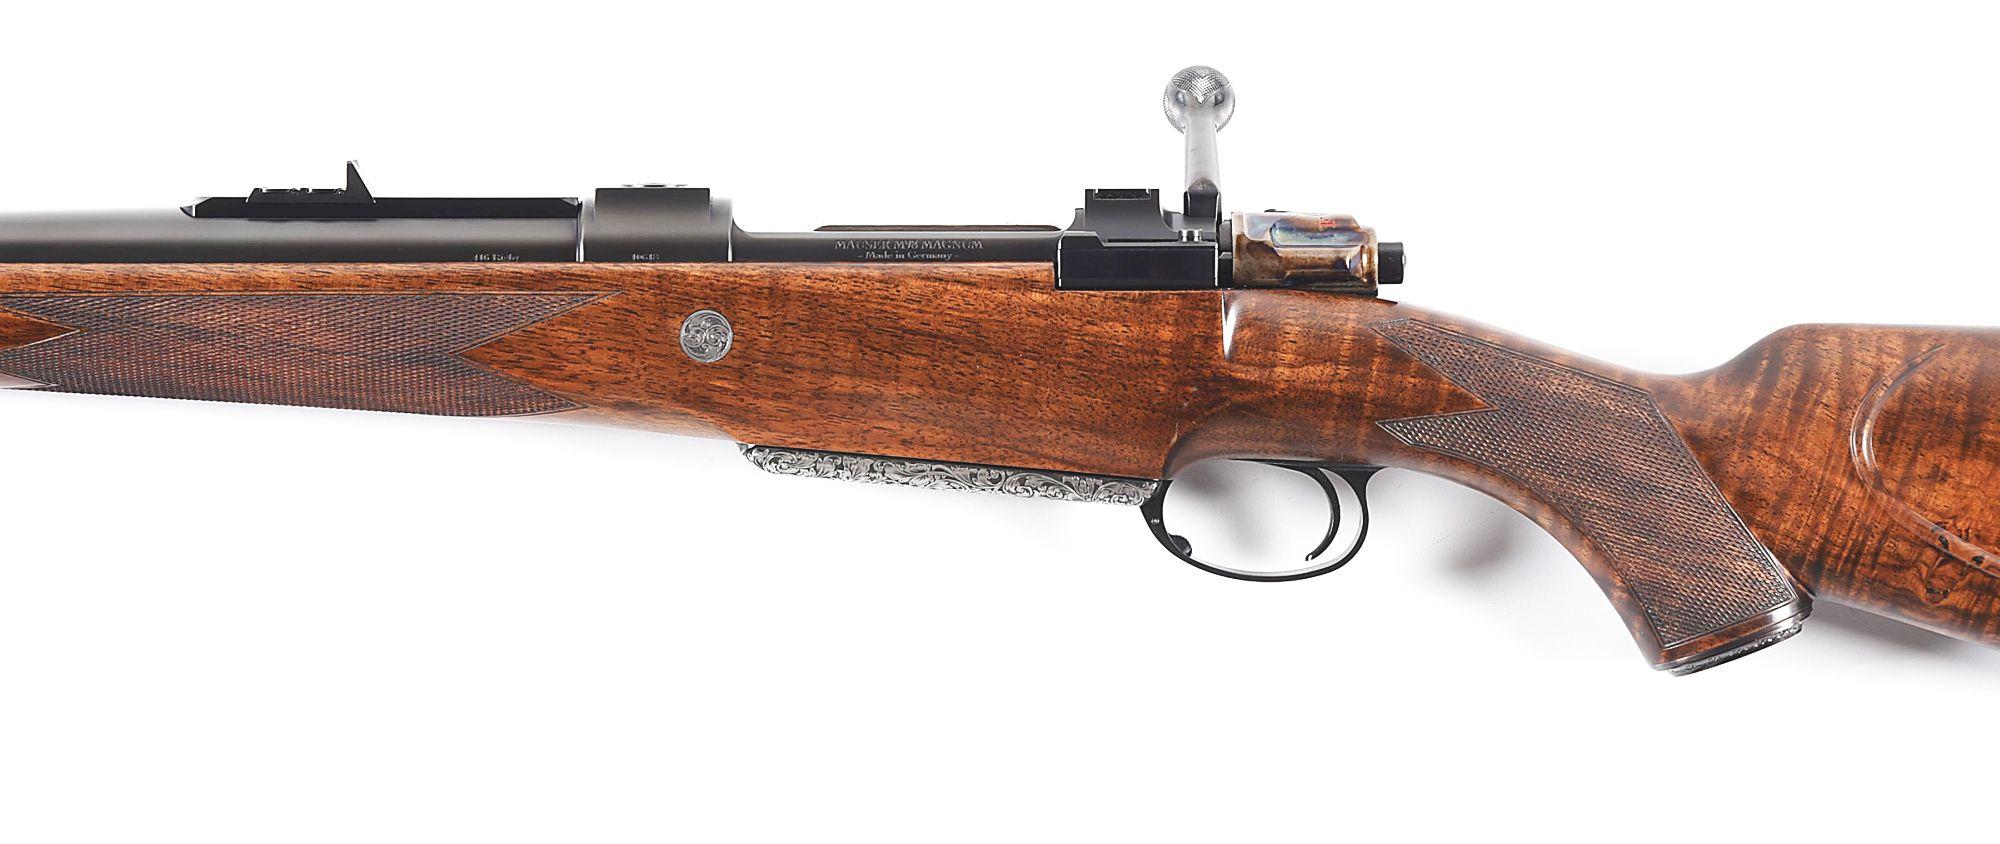 (M) RIGBY BIG GAME BOLT ACTION IN .416 RIGBY WITH SWAROVSKI GLASS.